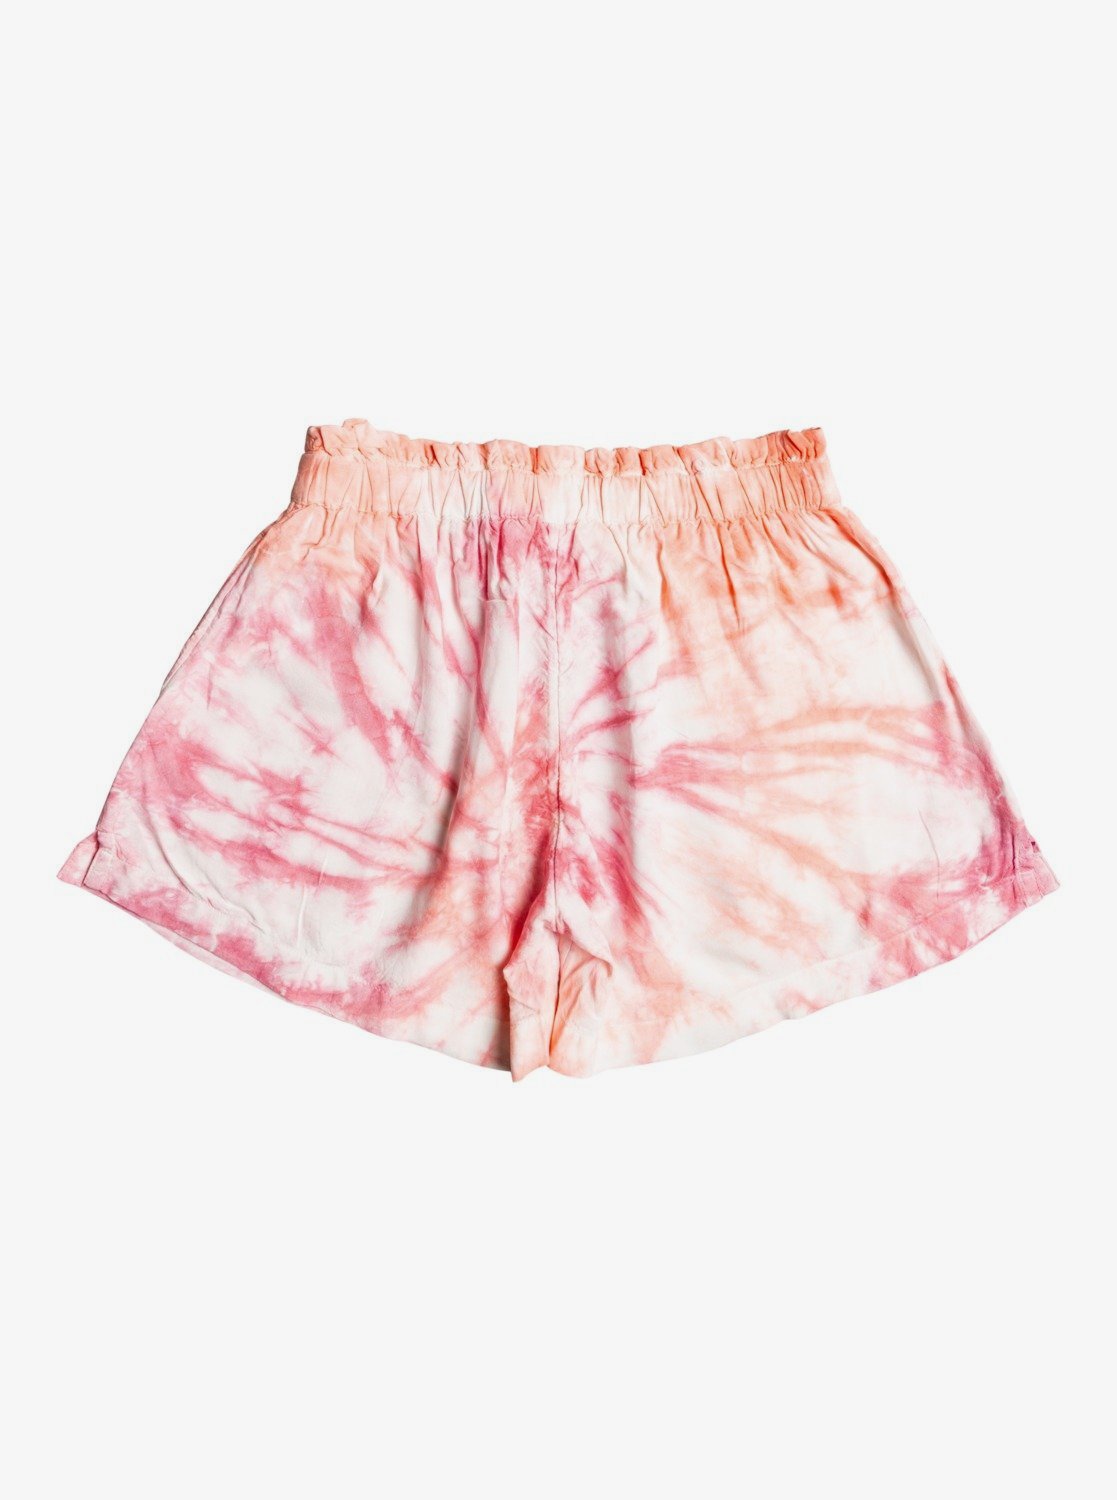 ALL OF THE STARS ELASTIC ADJUSTABLE WAIST TIE DYE PINK WHITE ORANGE GIRLS KIDS YOUTH SHORTS RELAXED FIT POCKETS ROXY